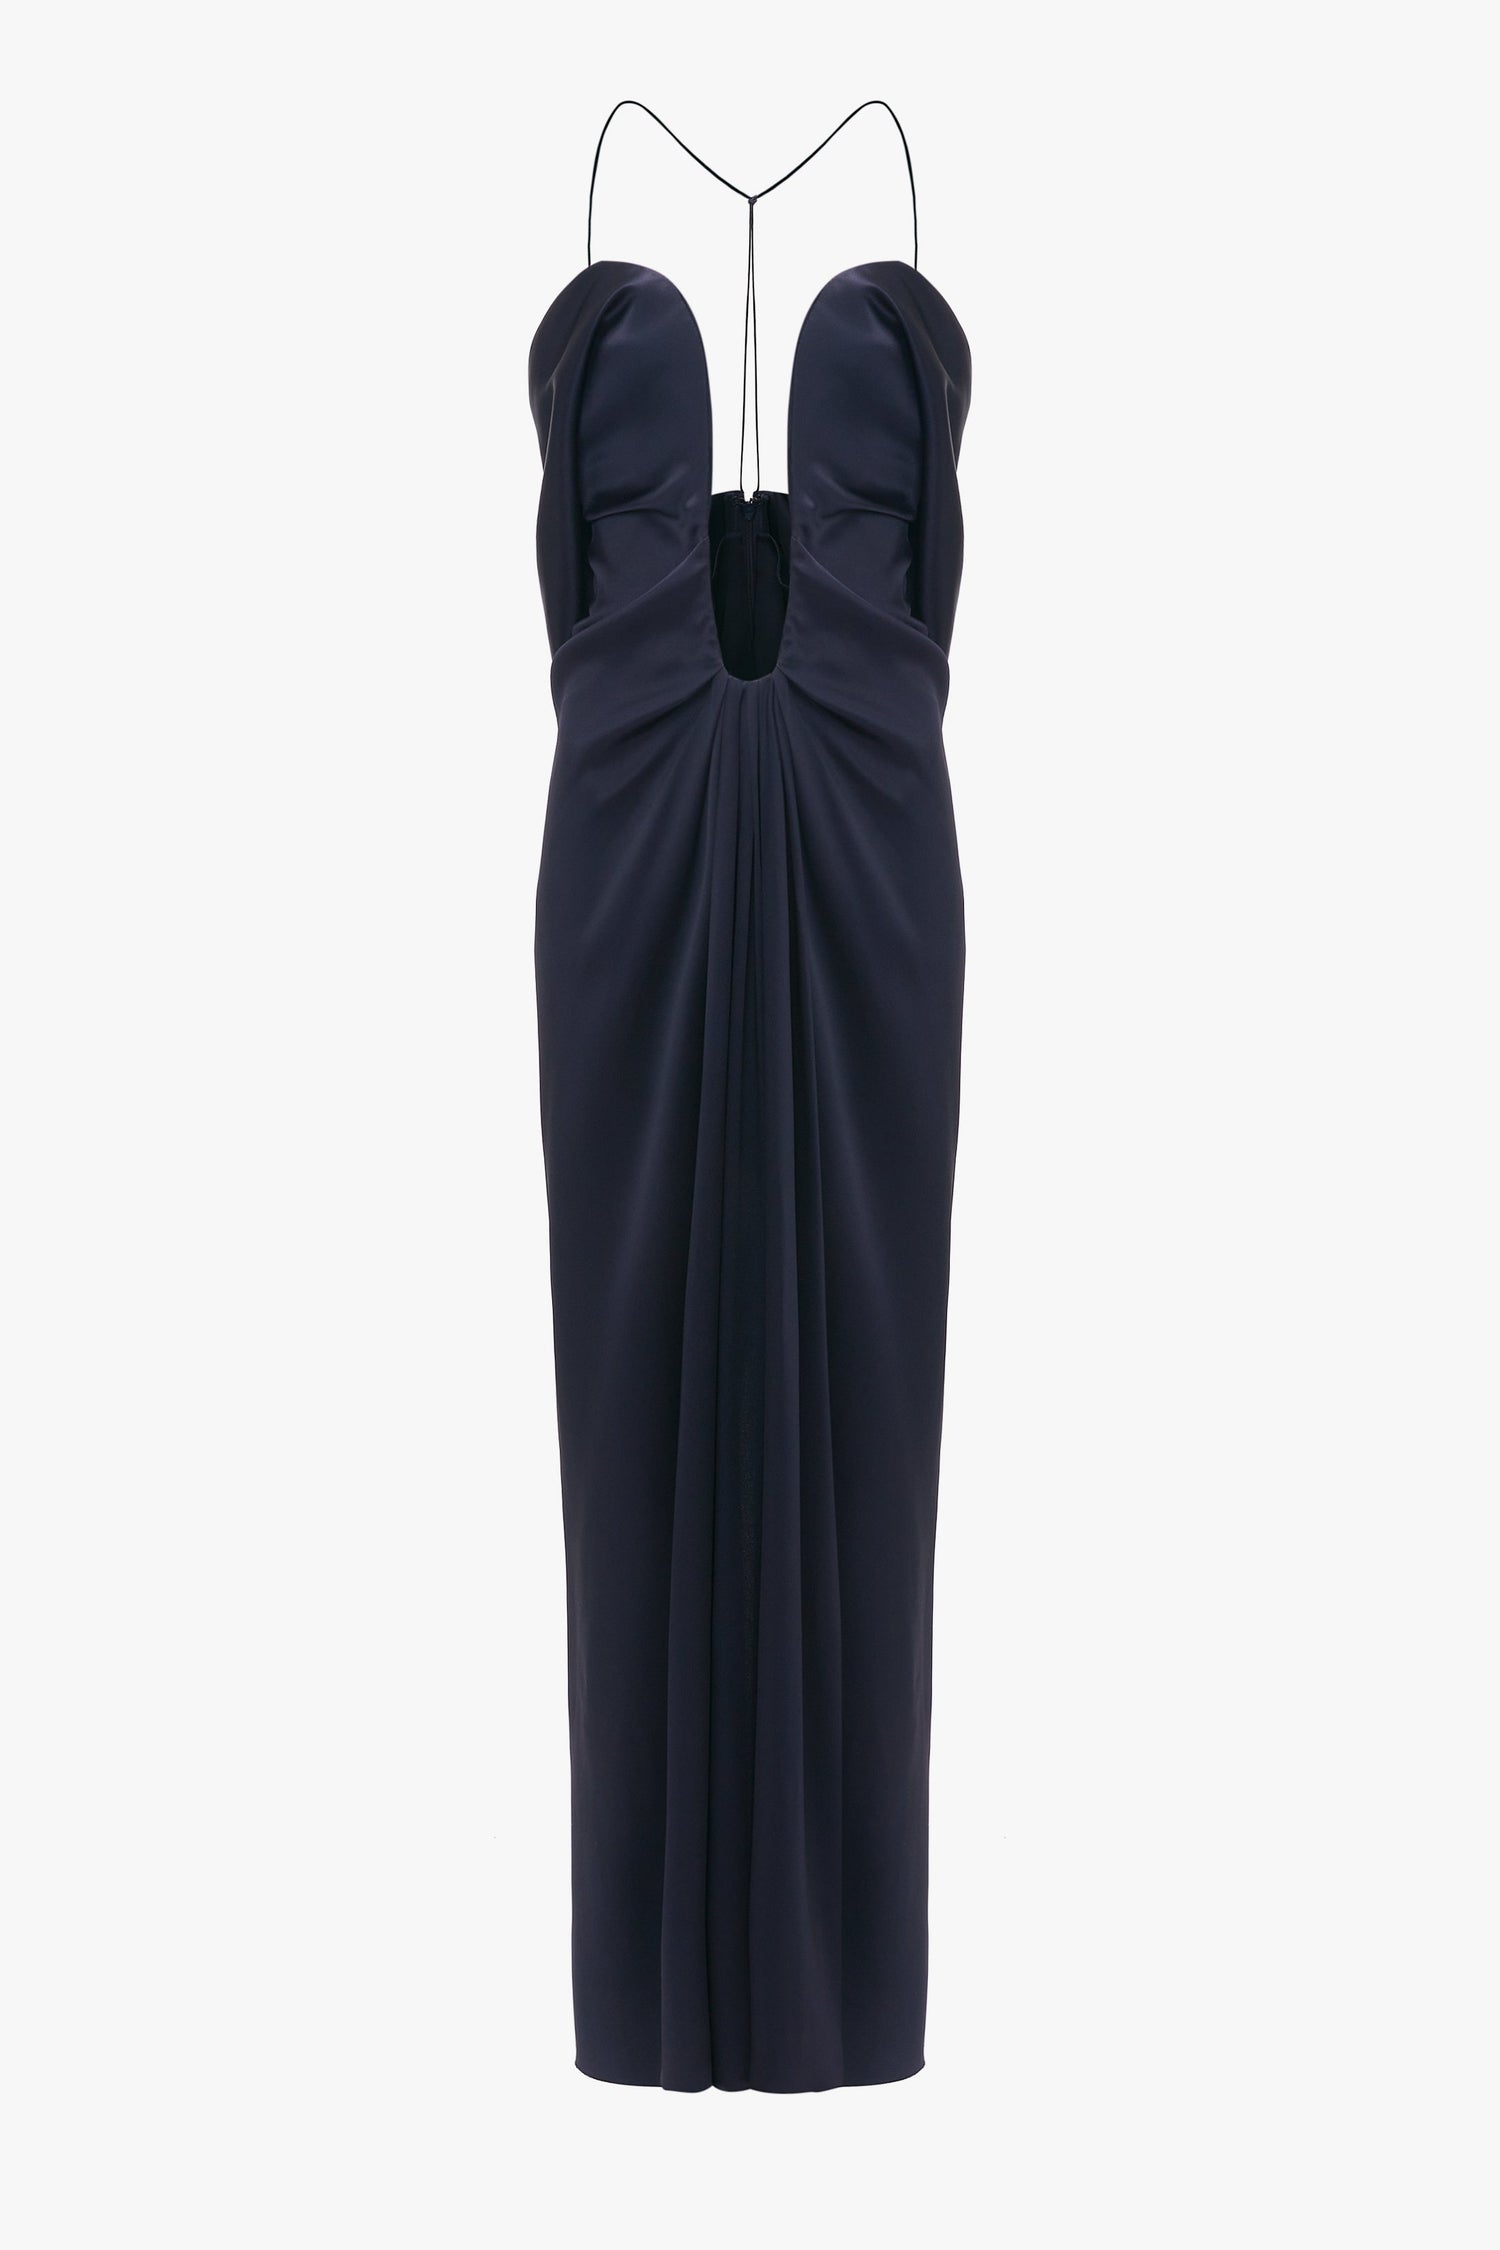 Navy blue evening gown with a sweetheart neckline and Victoria Beckham Frame Detail Cut-Out Cami Dress straps, featuring a cinched waist and draped skirt.